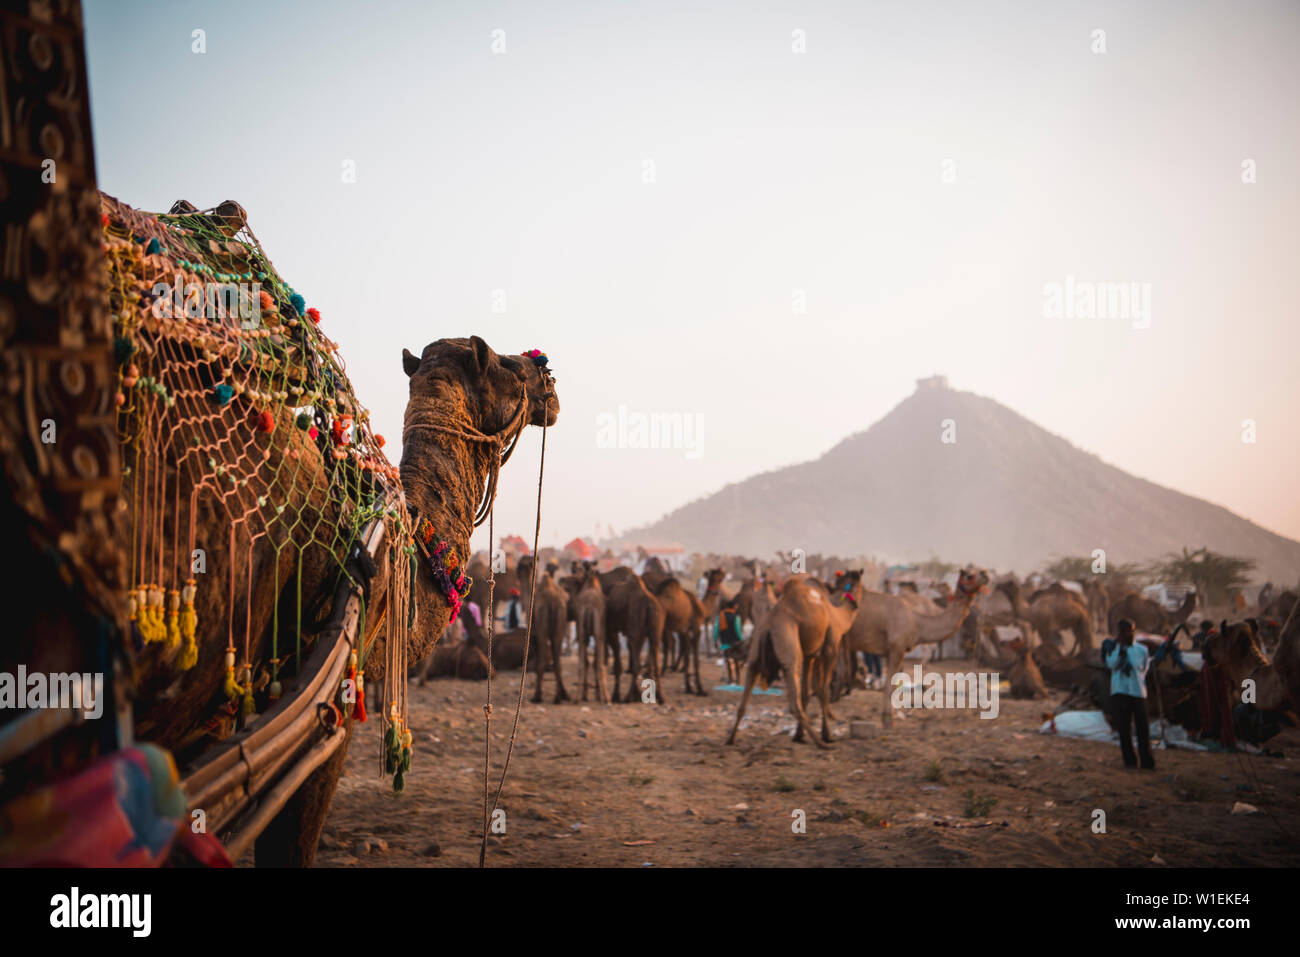 A Camel watches over all the other camels at Pushkar Camel Fair 2018, Pushkar, Rajasthan, India, Asia Stock Photo